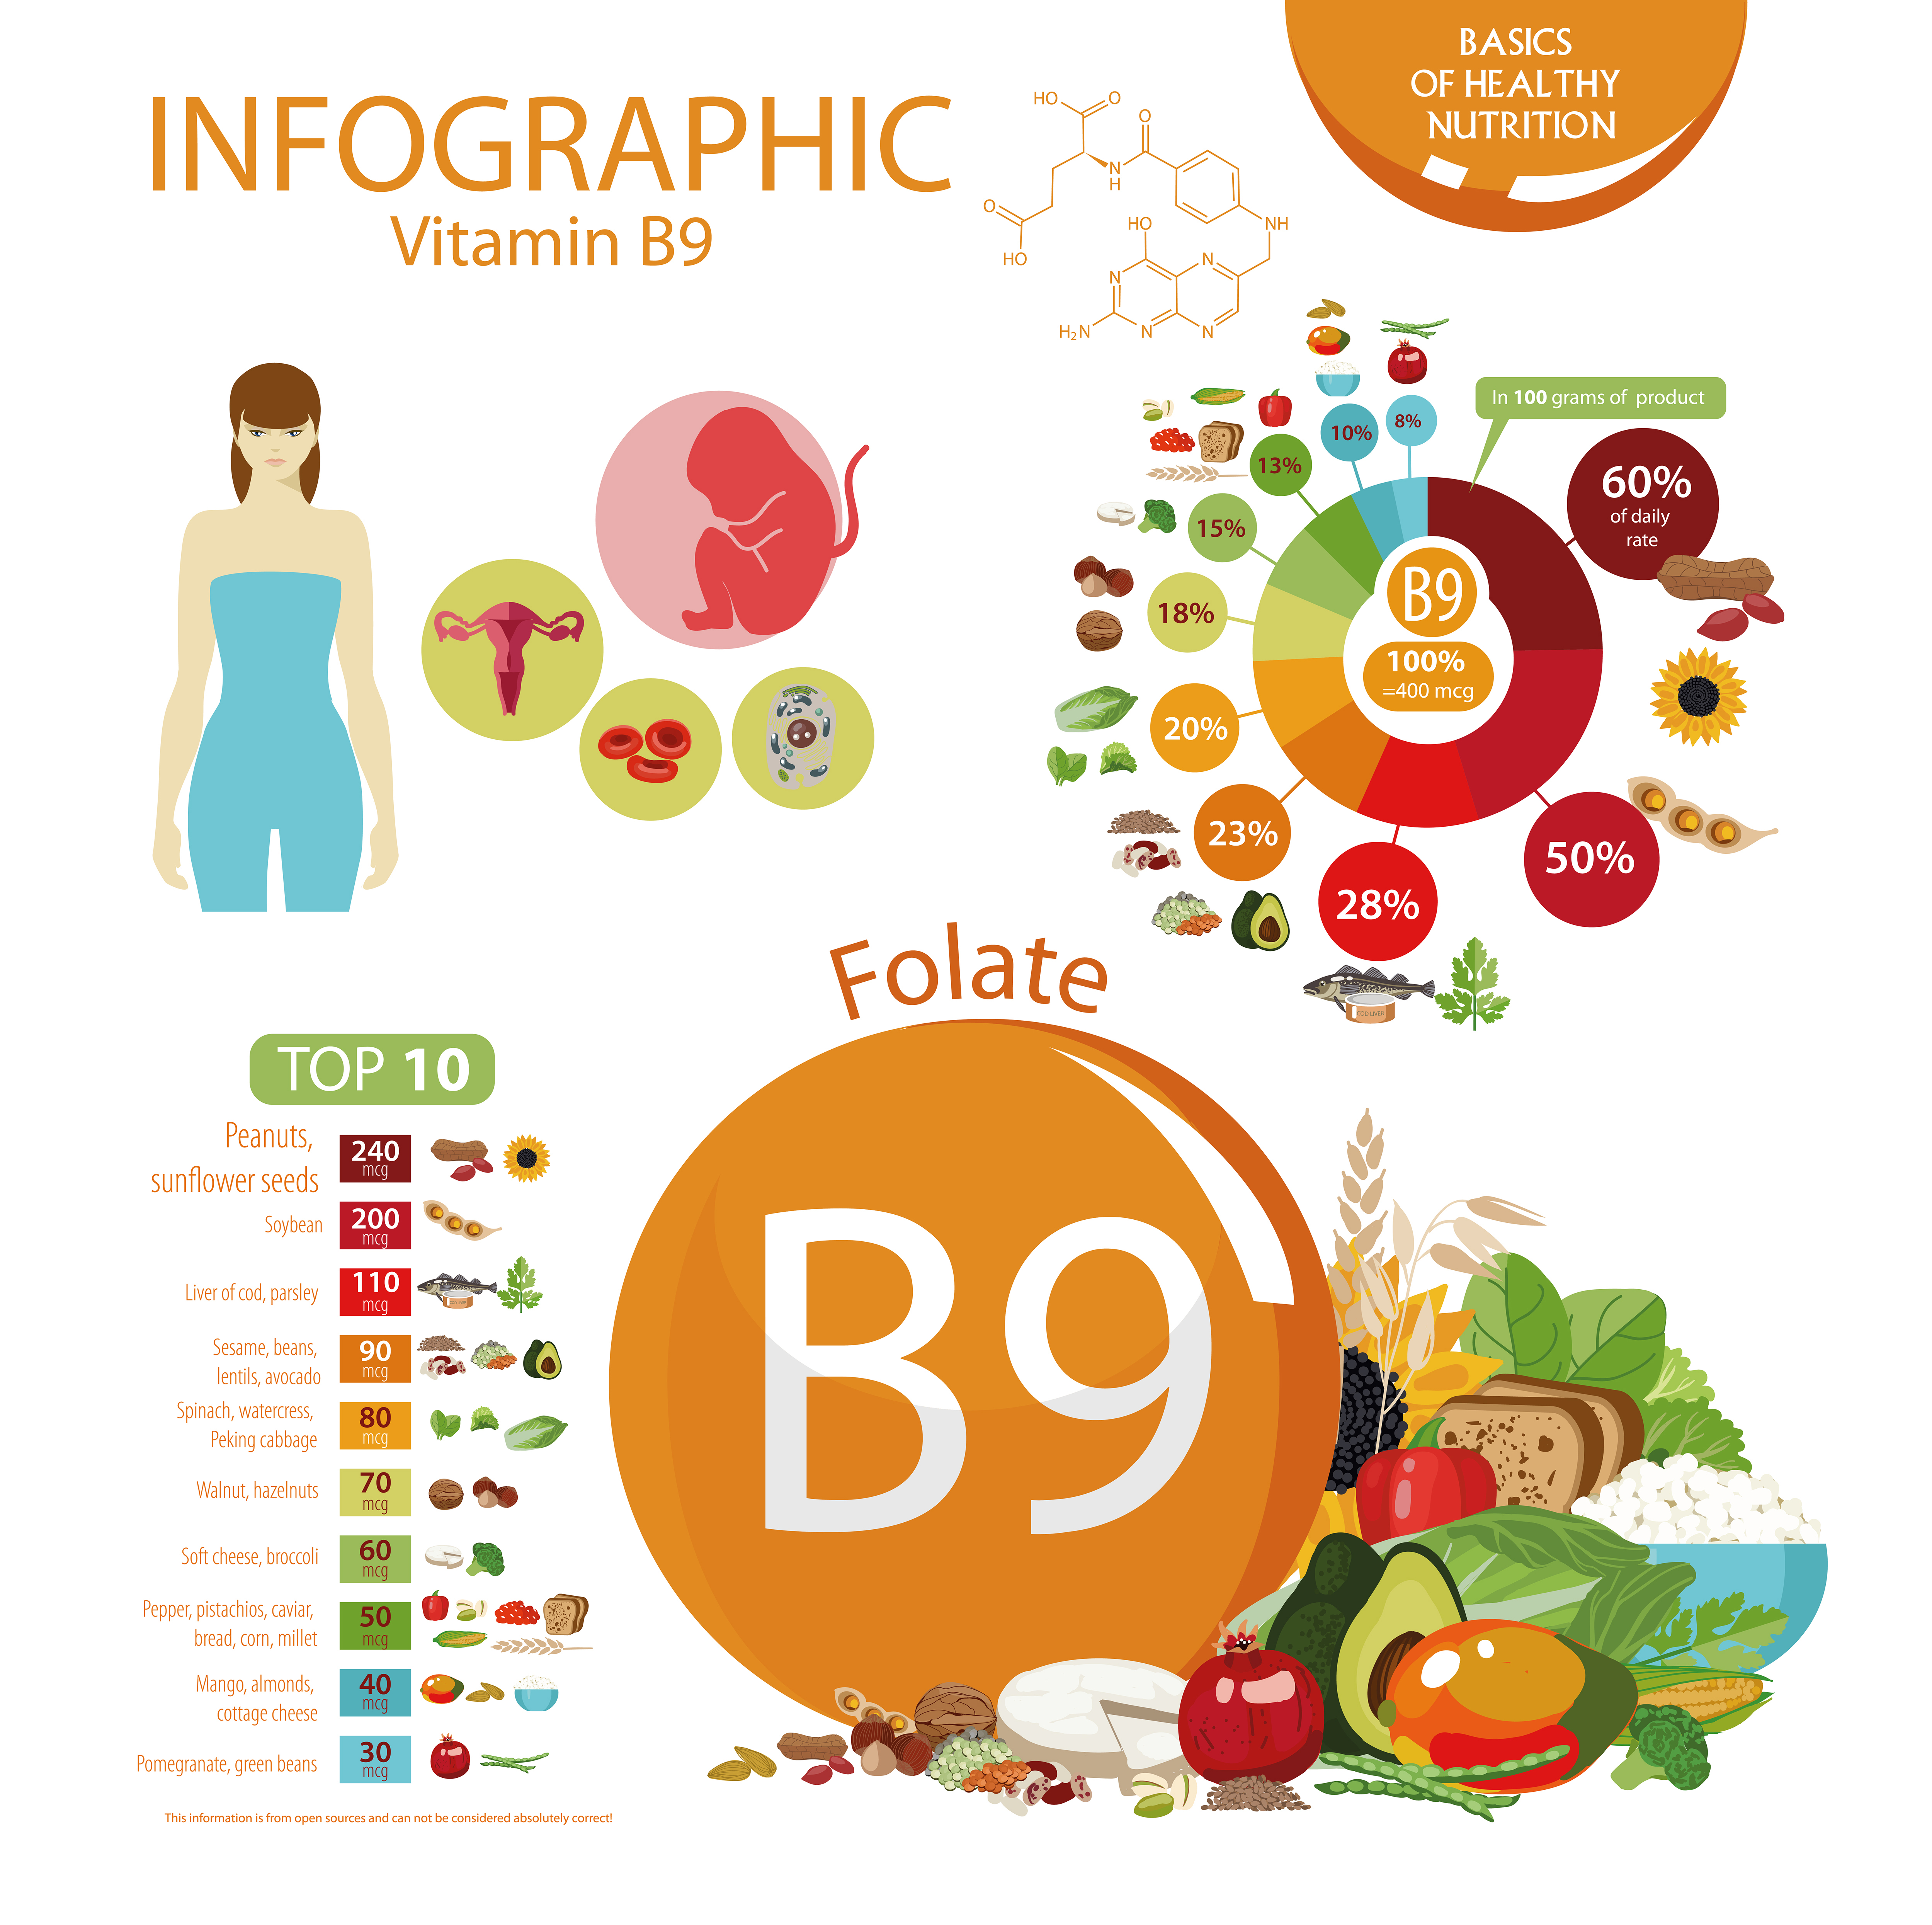 Vitamin B9 - actions, sources and RDA for folates